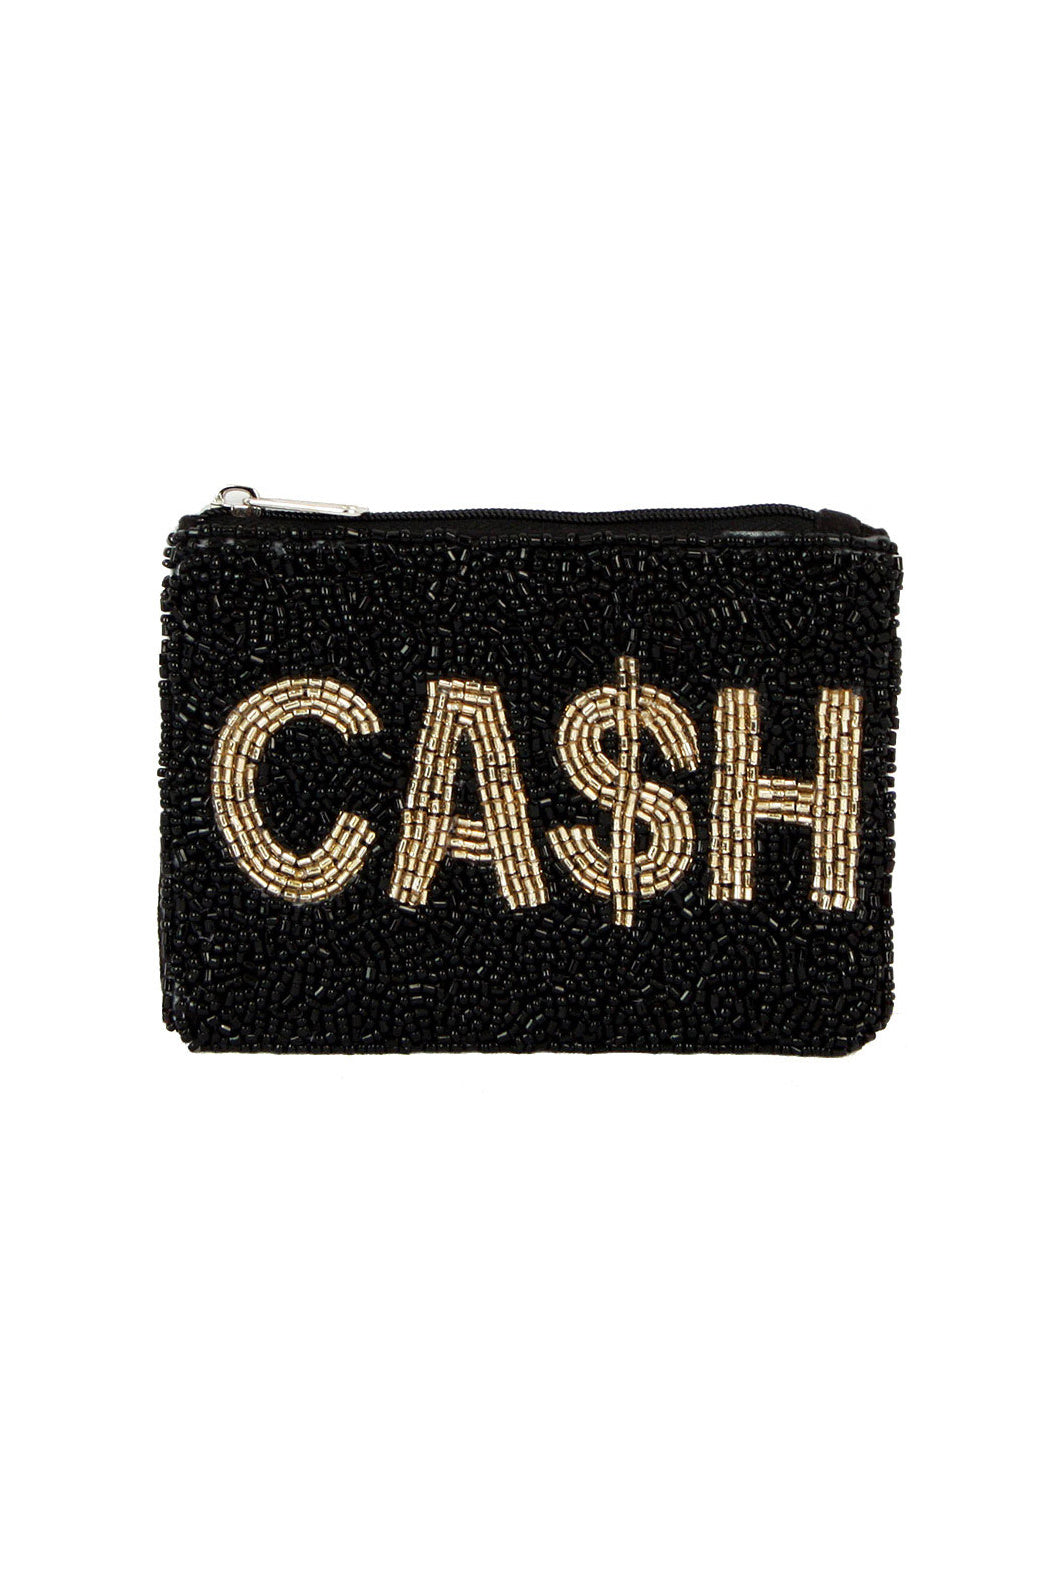 CA$H Beaded Pouch